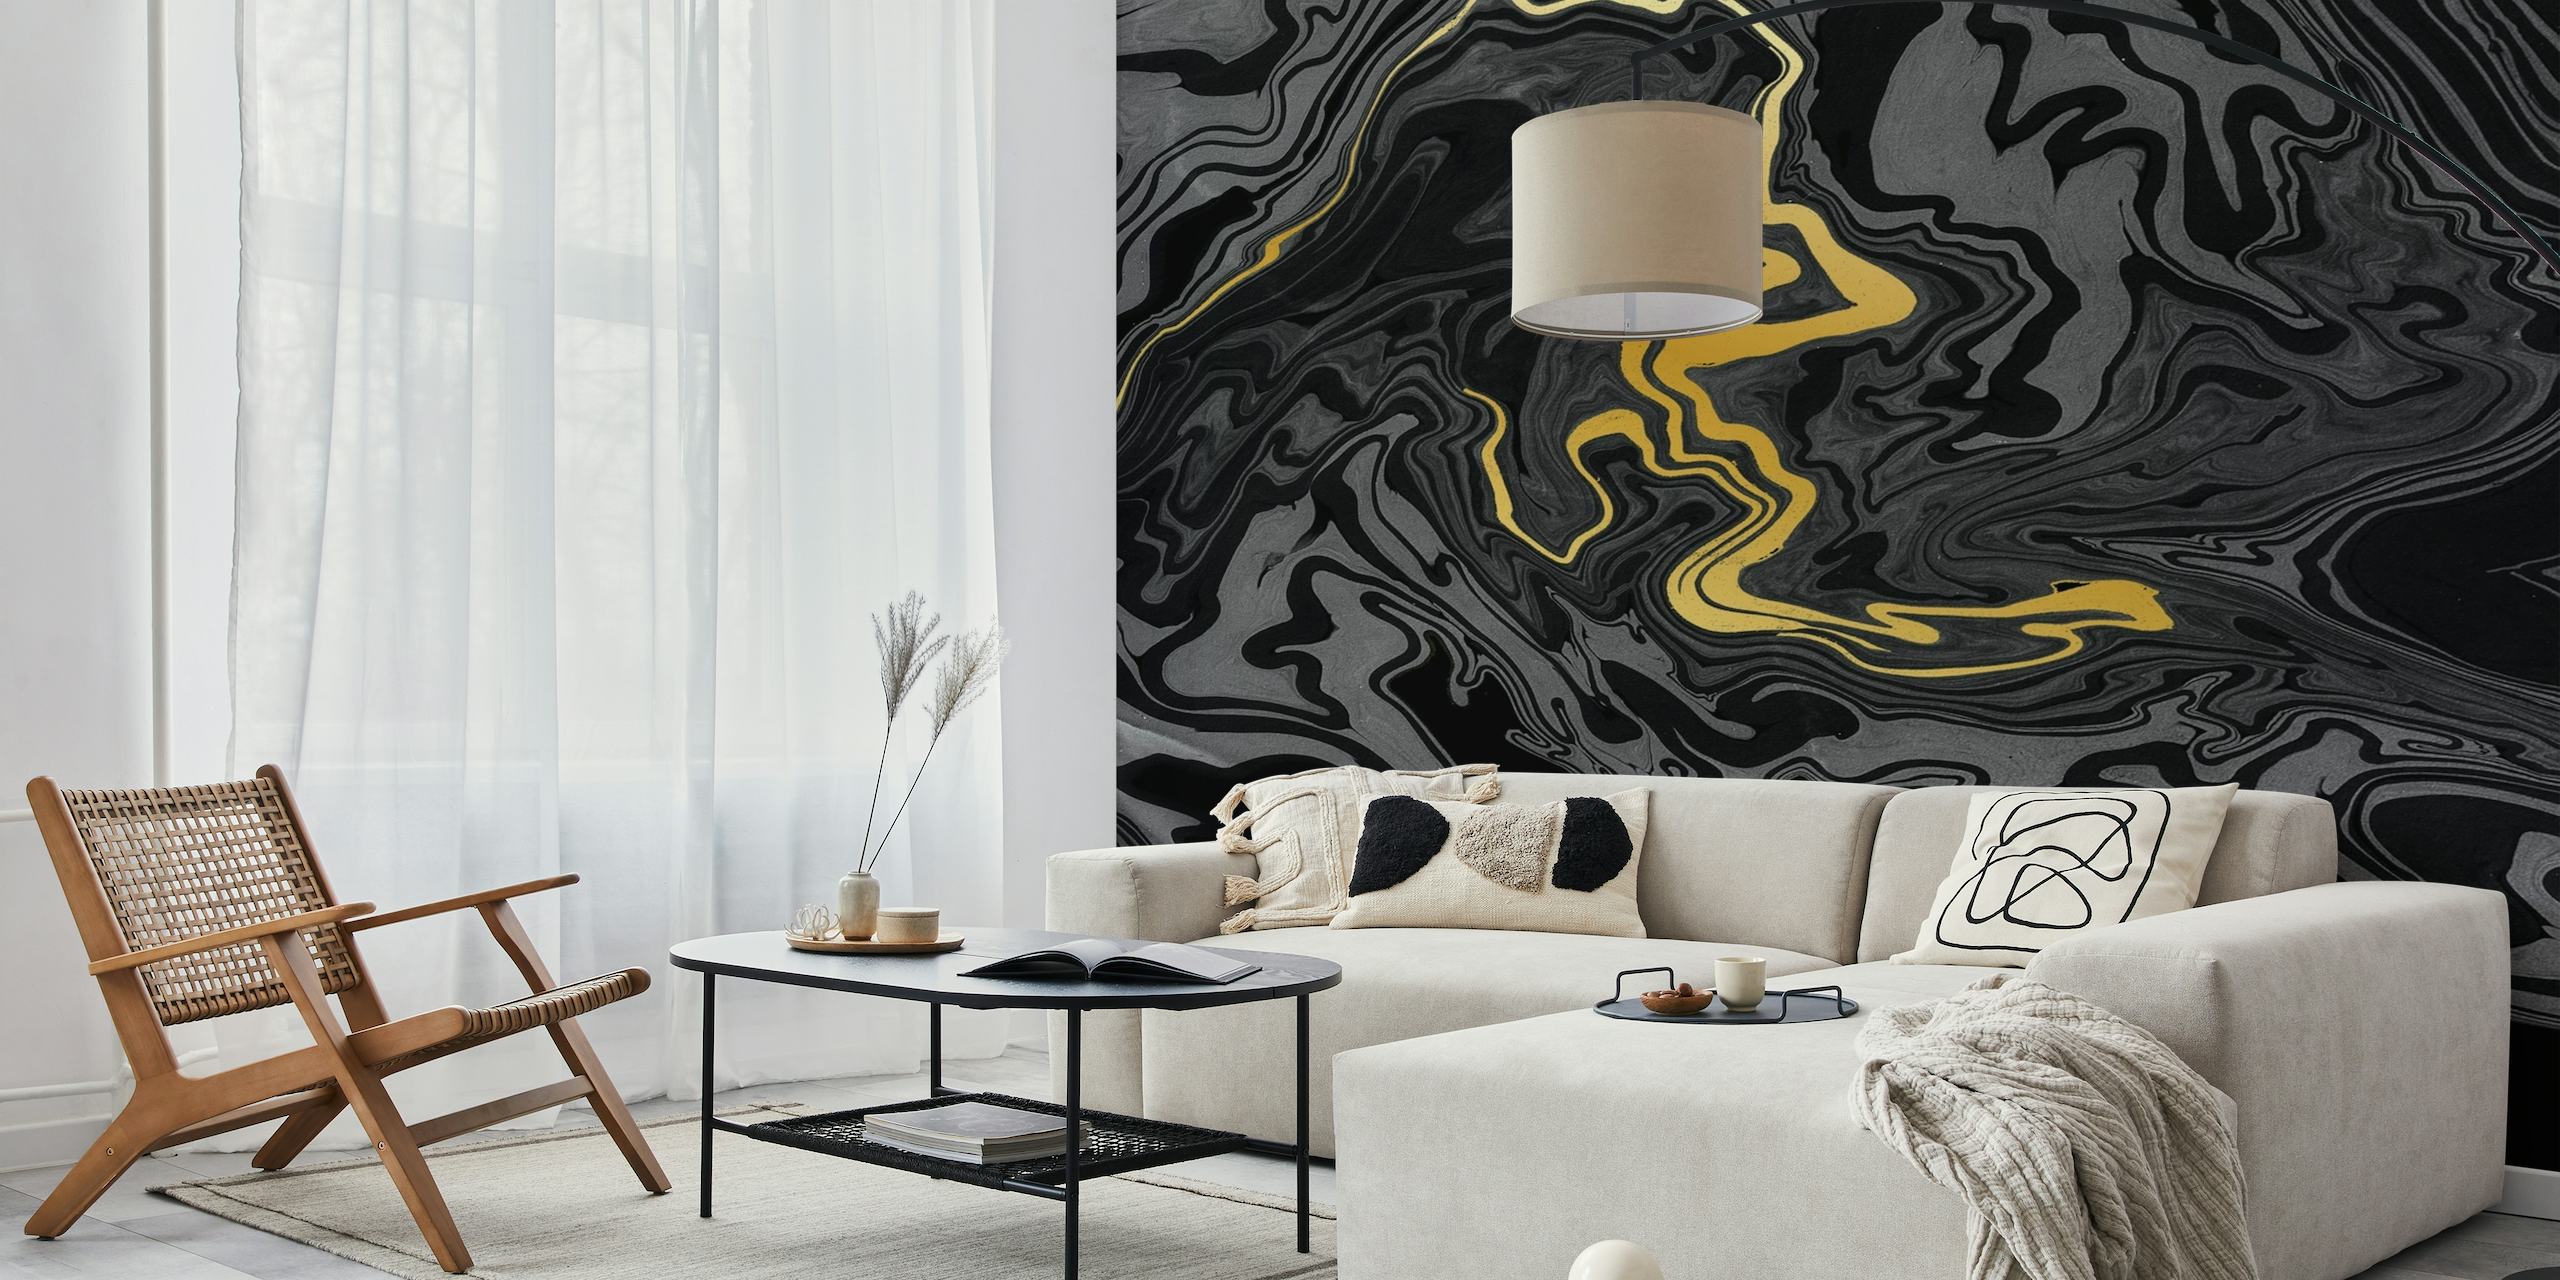 Black and Gold Marble wall mural with swirling patterns